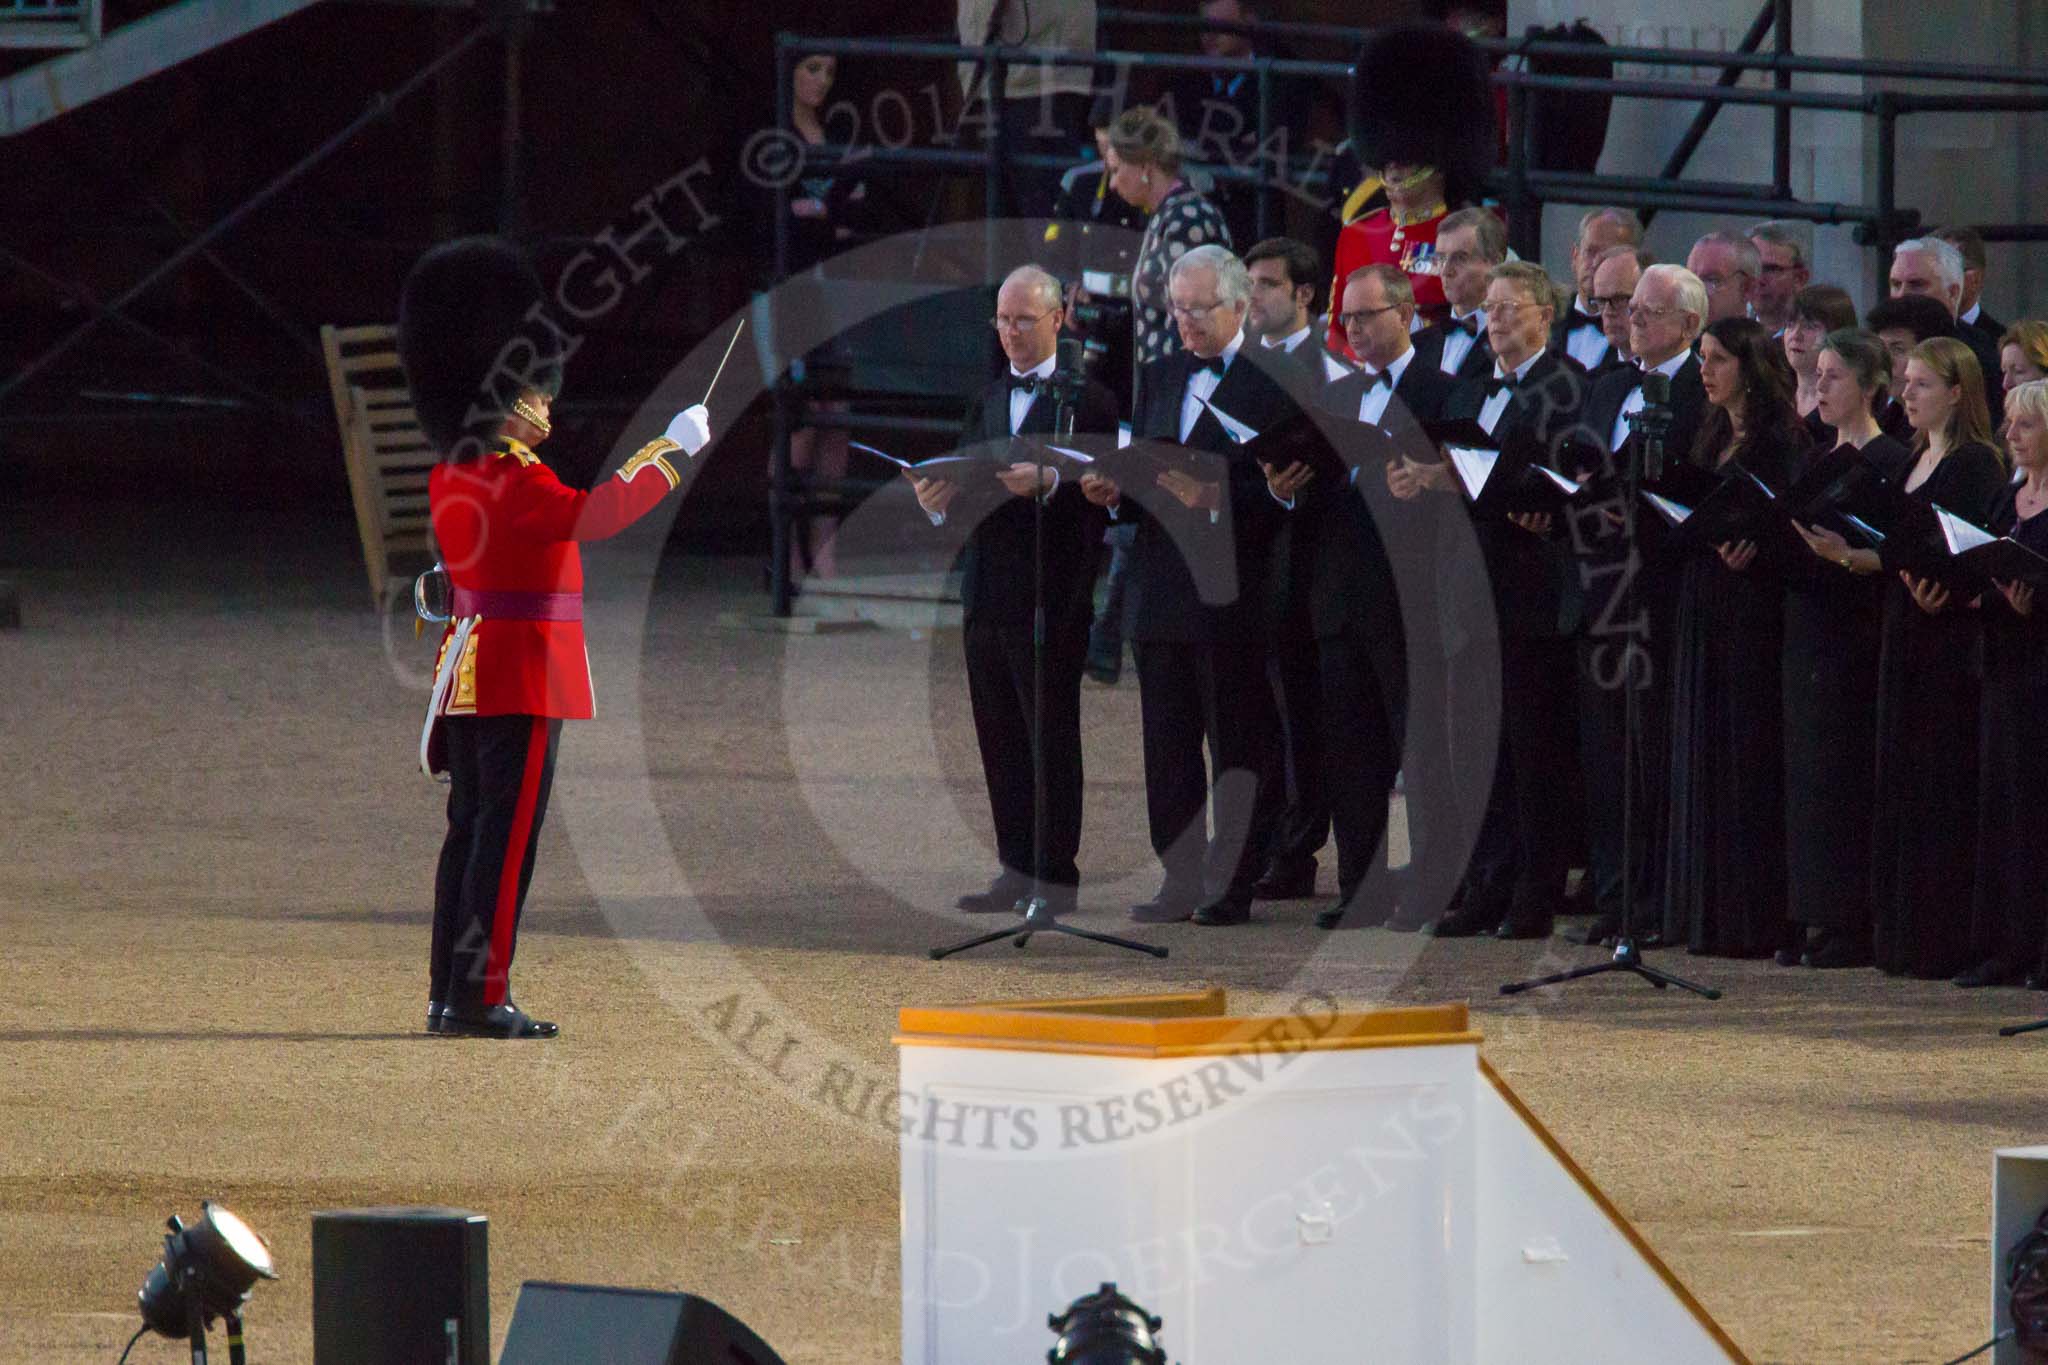 Beating Retreat 2014.
Horse Guards Parade, Westminster,
London SW1A,

United Kingdom,
on 11 June 2014 at 21:28, image #336